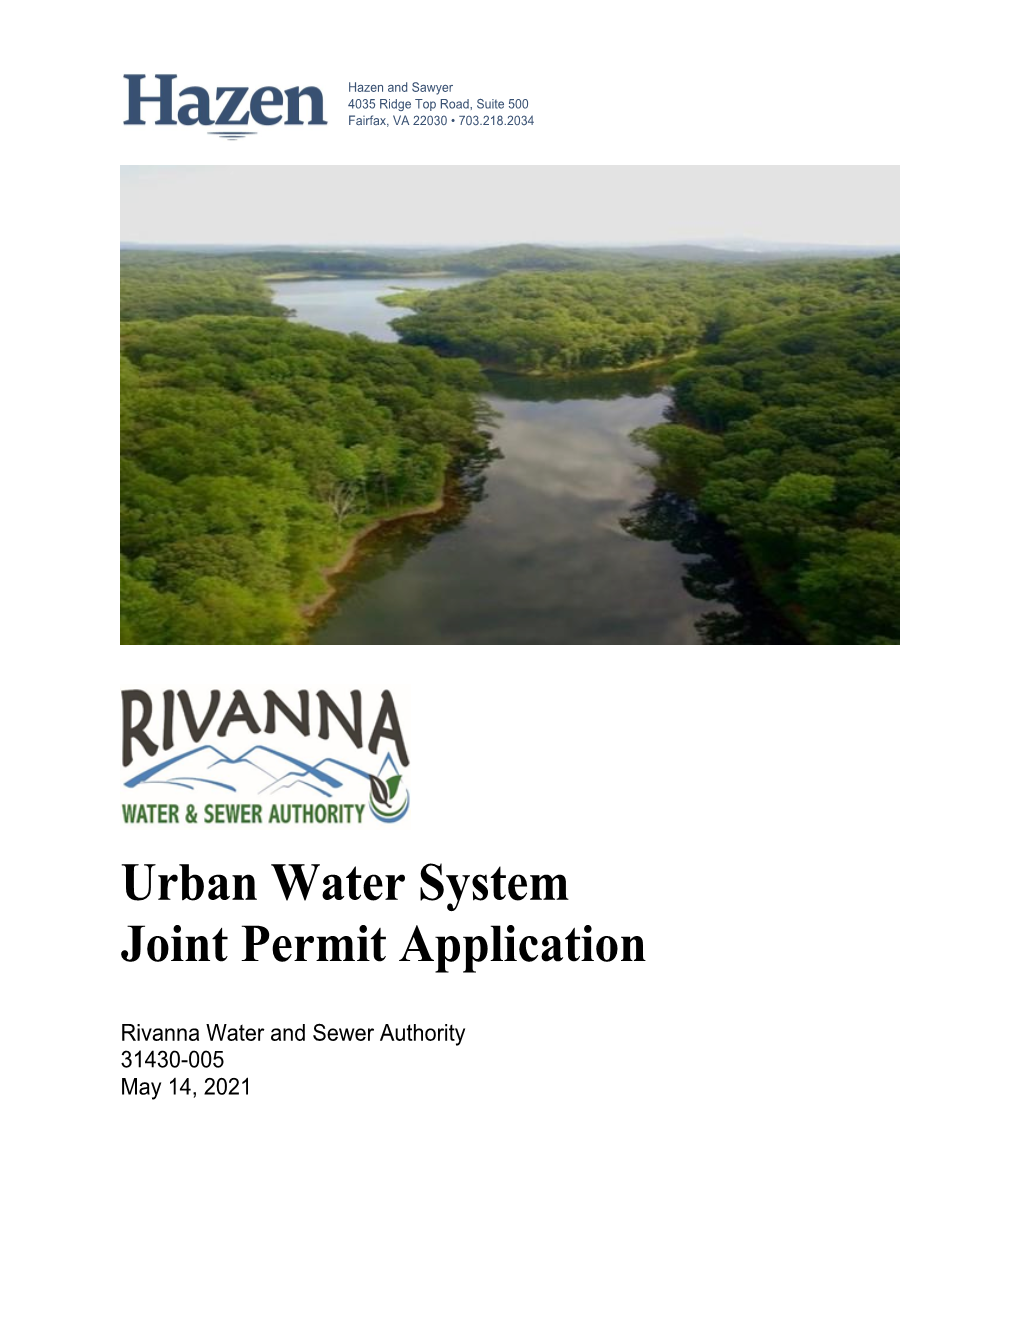 Joint Permit Application